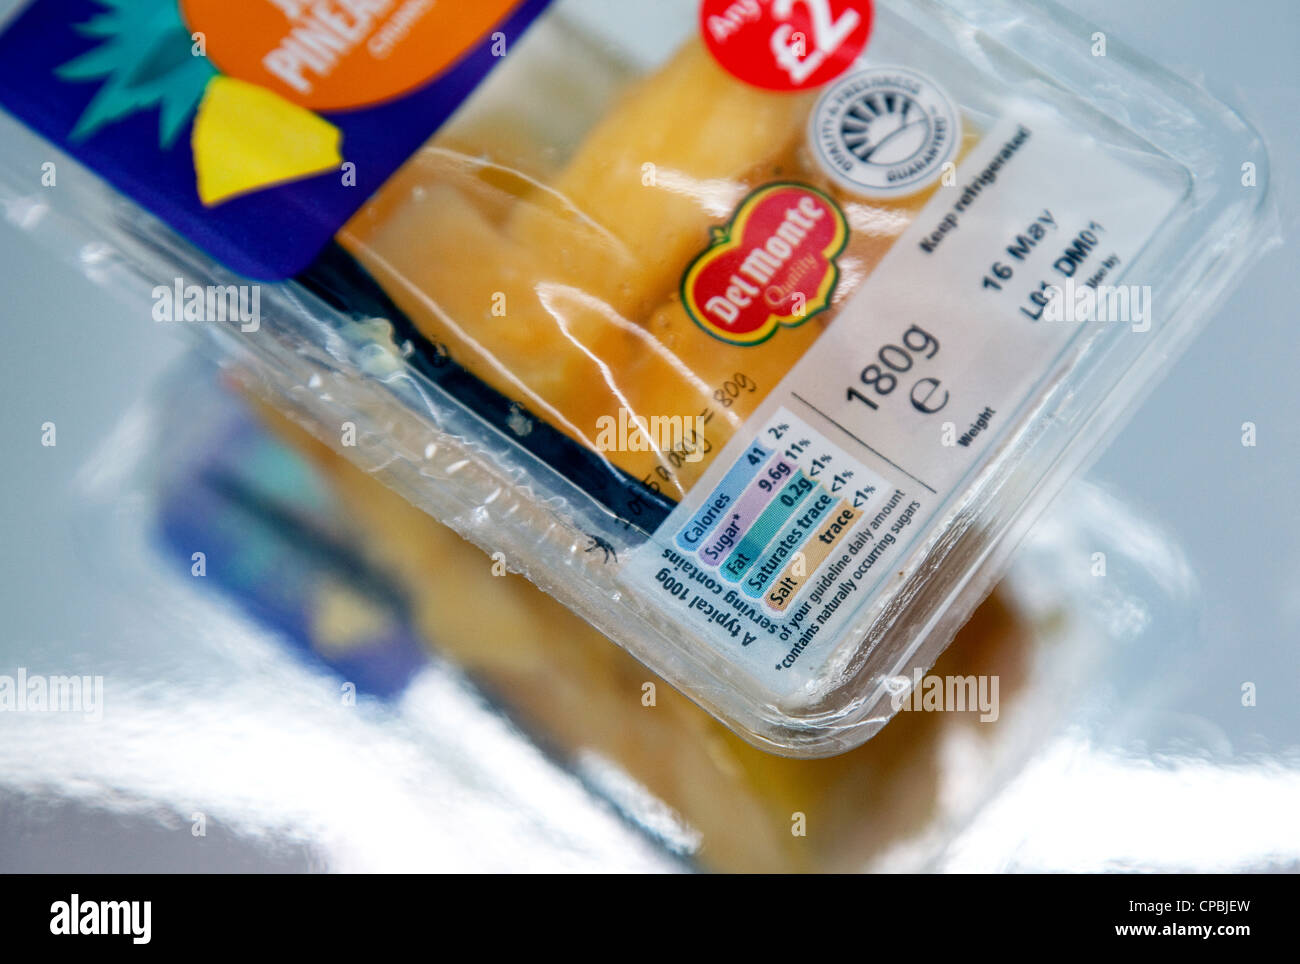 Health information food labelling on supermarket products Stock Photo